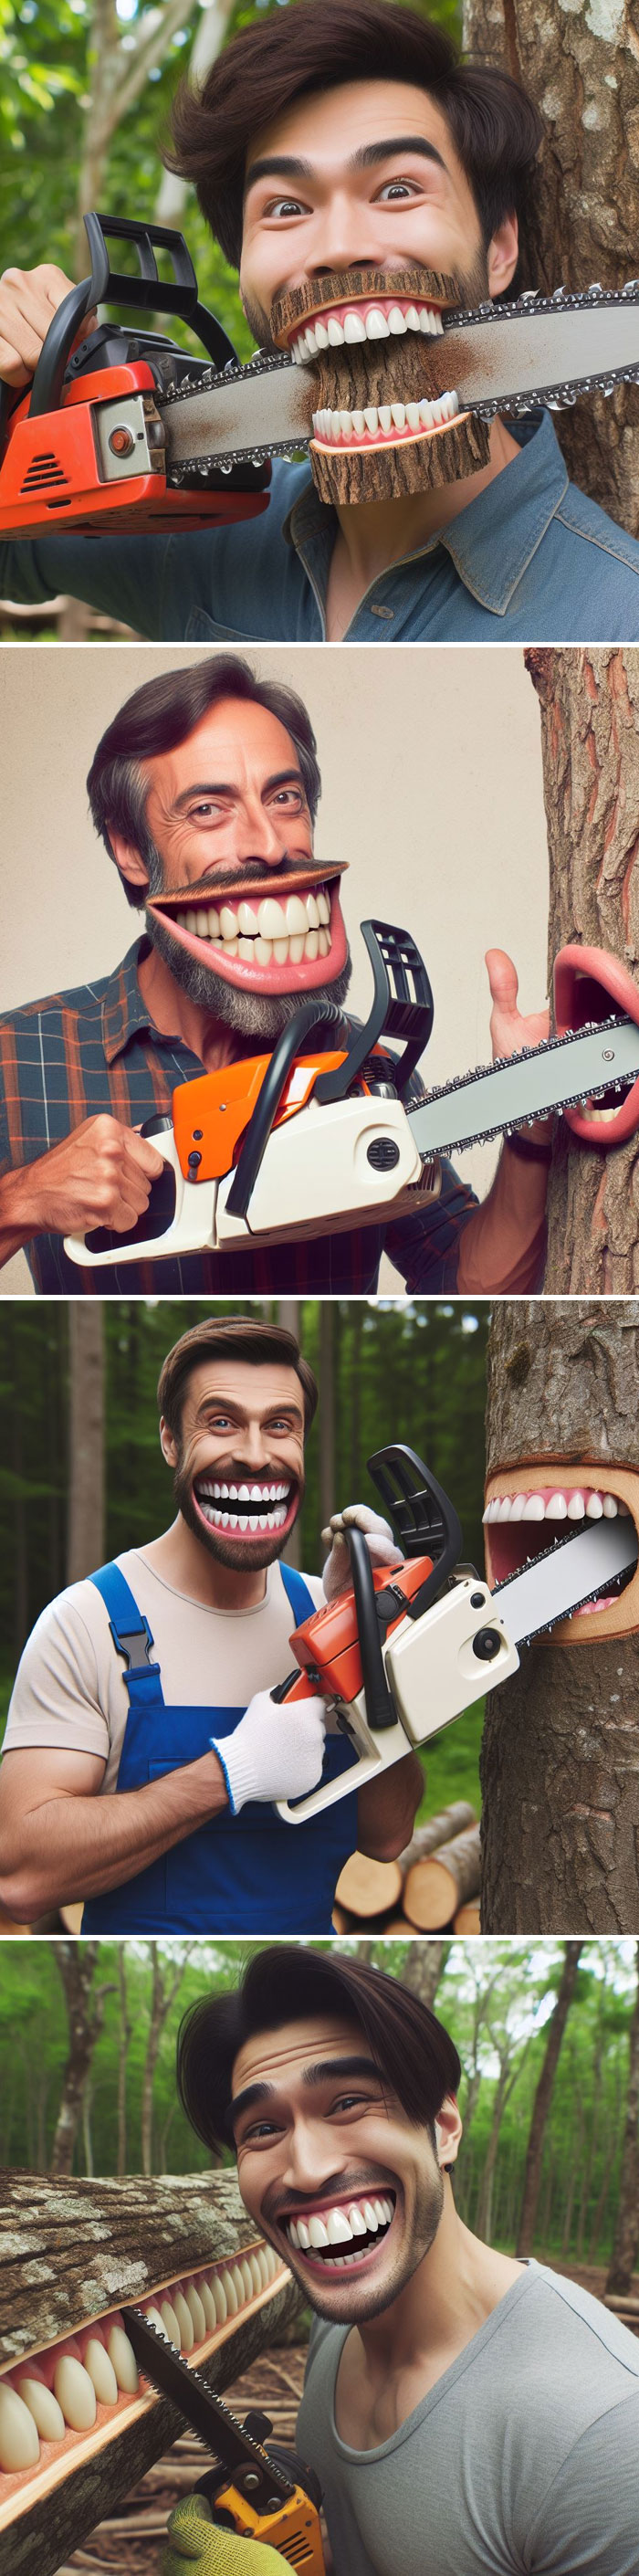 I Don't Usually Post My Failed Experiments, But This One Was So Amazing That I Couldn't Resist. My Prompt Was: "A Nice Man With A Chainsaw Growing From His Mouth. The Chainsaw Blades Look Like Teeth. He's Using It To Help Cut Down A Tree." I Was Prepared For It To Come Out A Bit Wrong And Require Tuning; I Was Not Prepared For The Incomprehensible Terrors That Simple Incantation Would Unleash Upon My Fragile, Mortal Psyche: